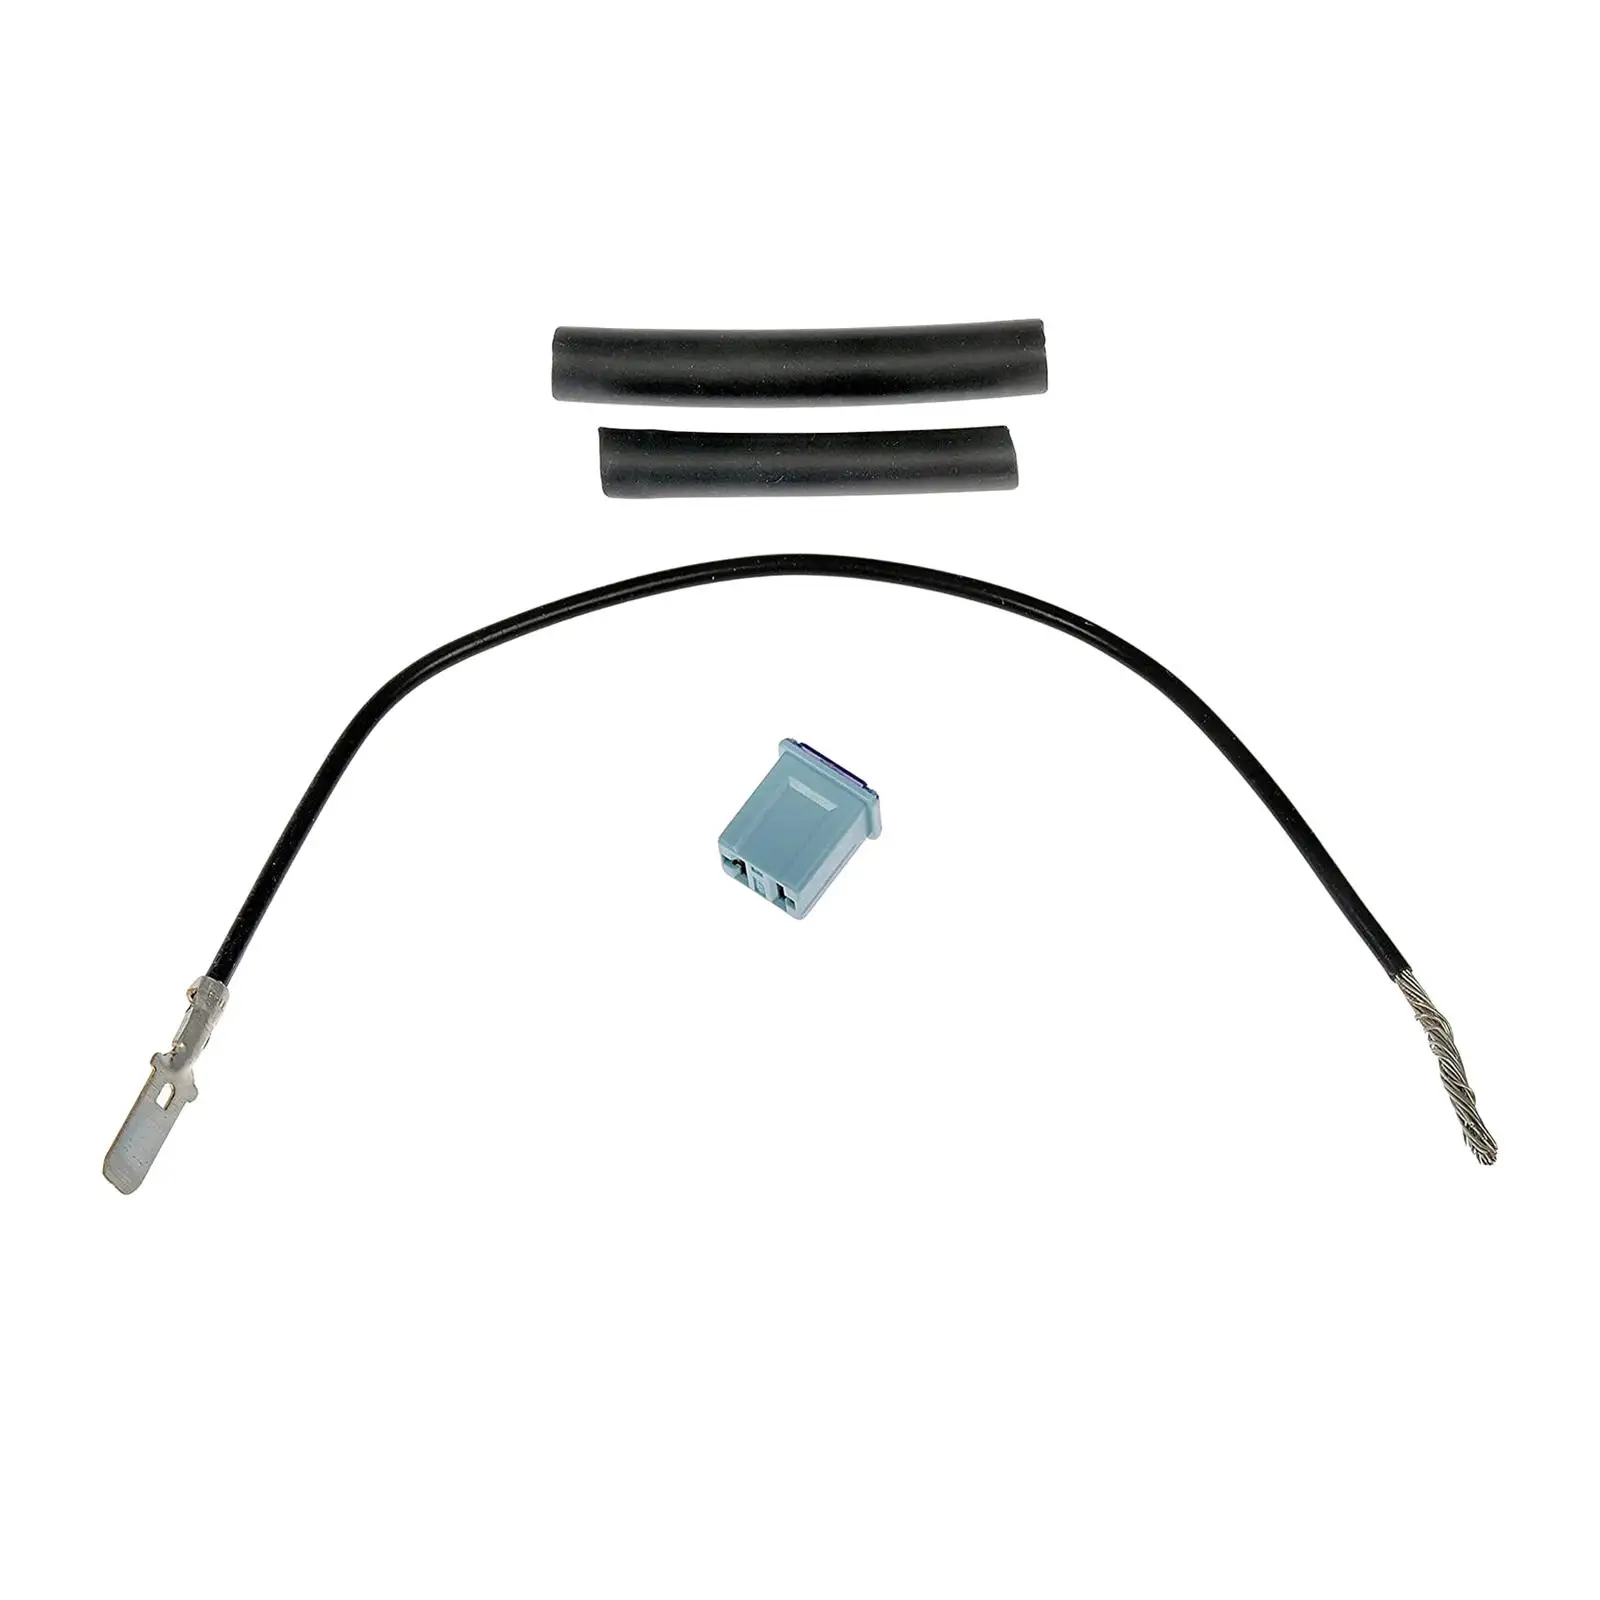 Fuel Pump Fuse Relocation Harness Set Fuse Relocation set for